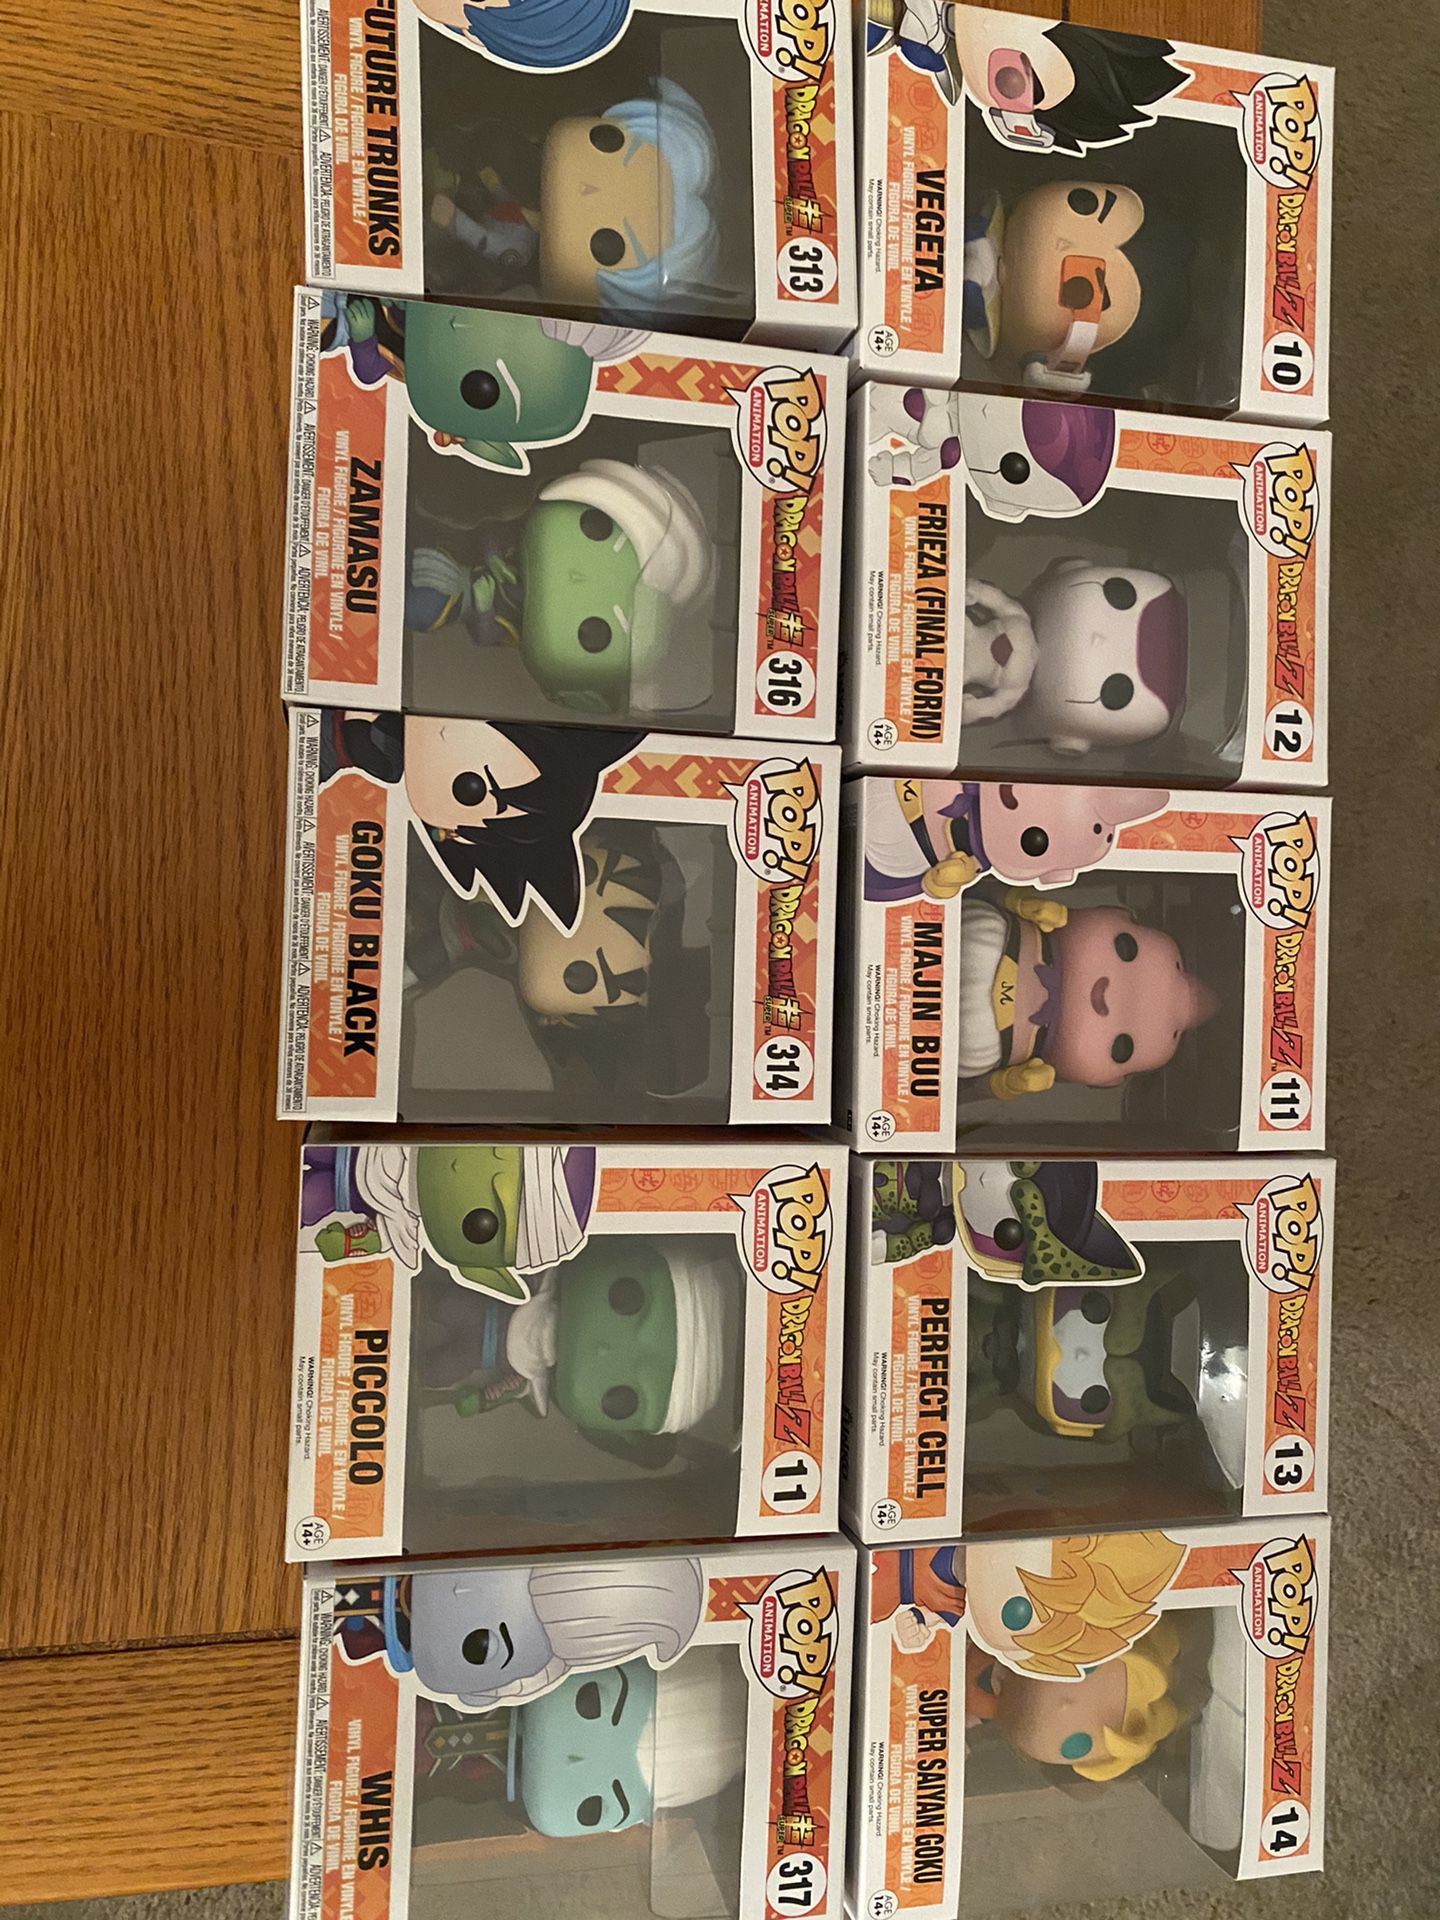 Pop! Dragonball Z and Super